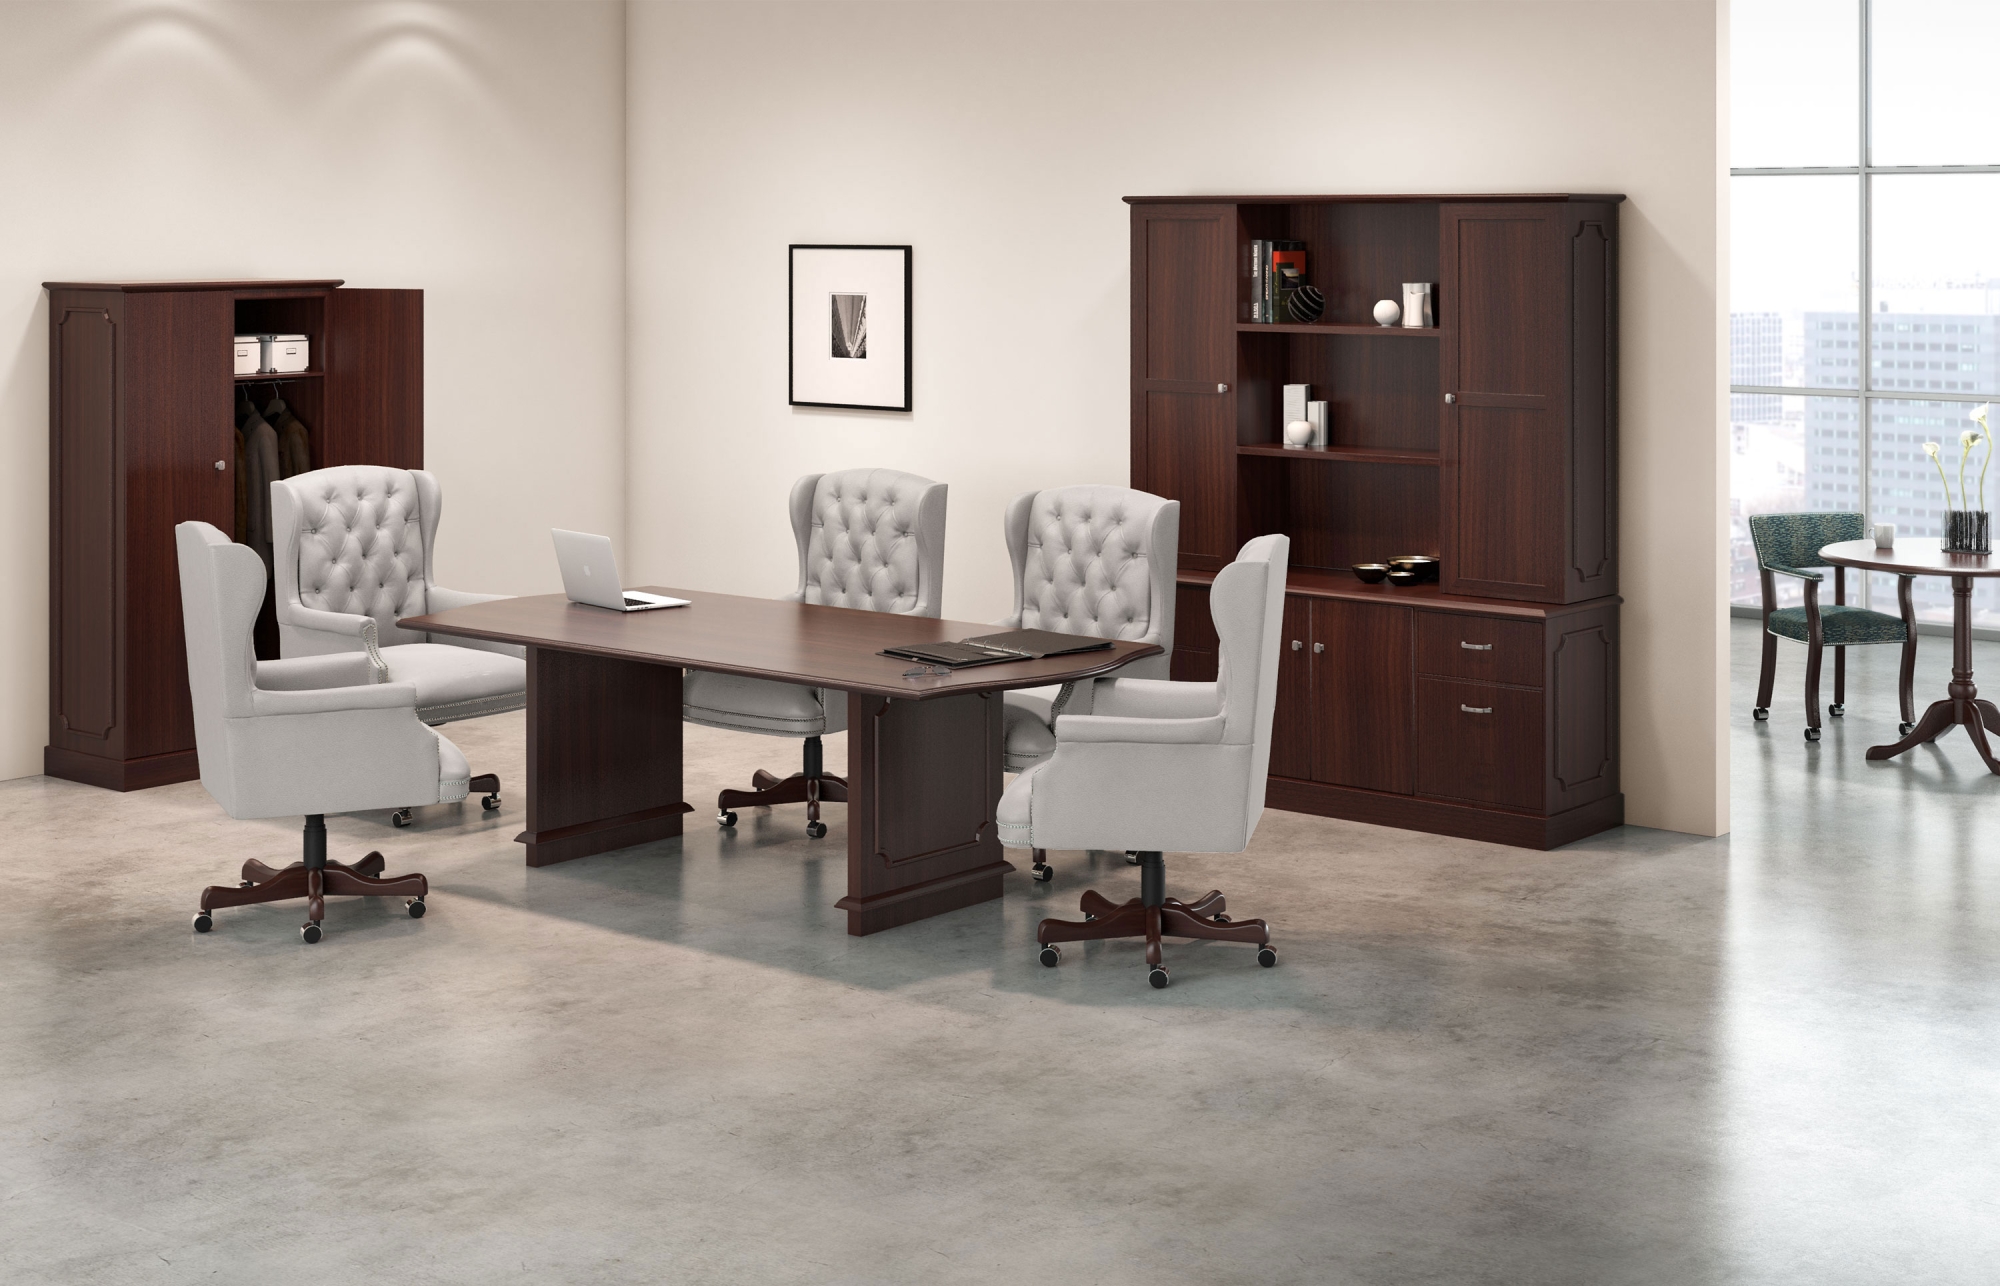 Indiana Furniture, Tables, Traditional components echo history and create timeless foundations for meeting rooms that